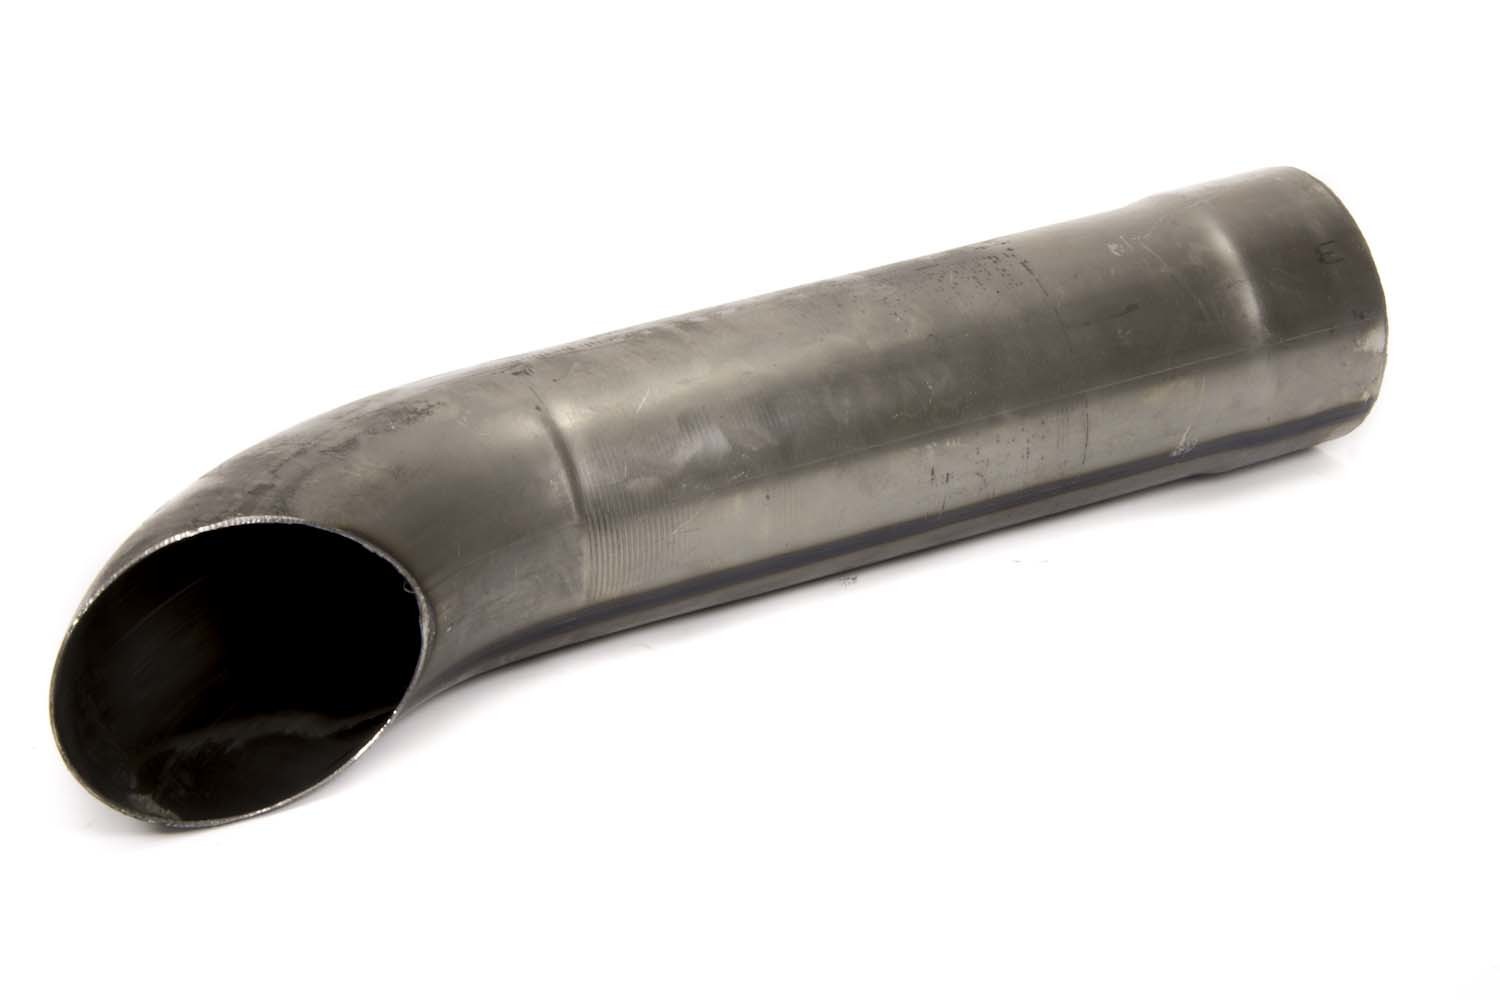 Schoenfeld Headers 3026 - Exhaust Tip, Clamp-On, 3 in Inlet, 3 in Round Outlet, 15-1/2 in Long, Single Wall, Cut Edge, Angled Cut, Turnout Style, Steel, Natural, Each